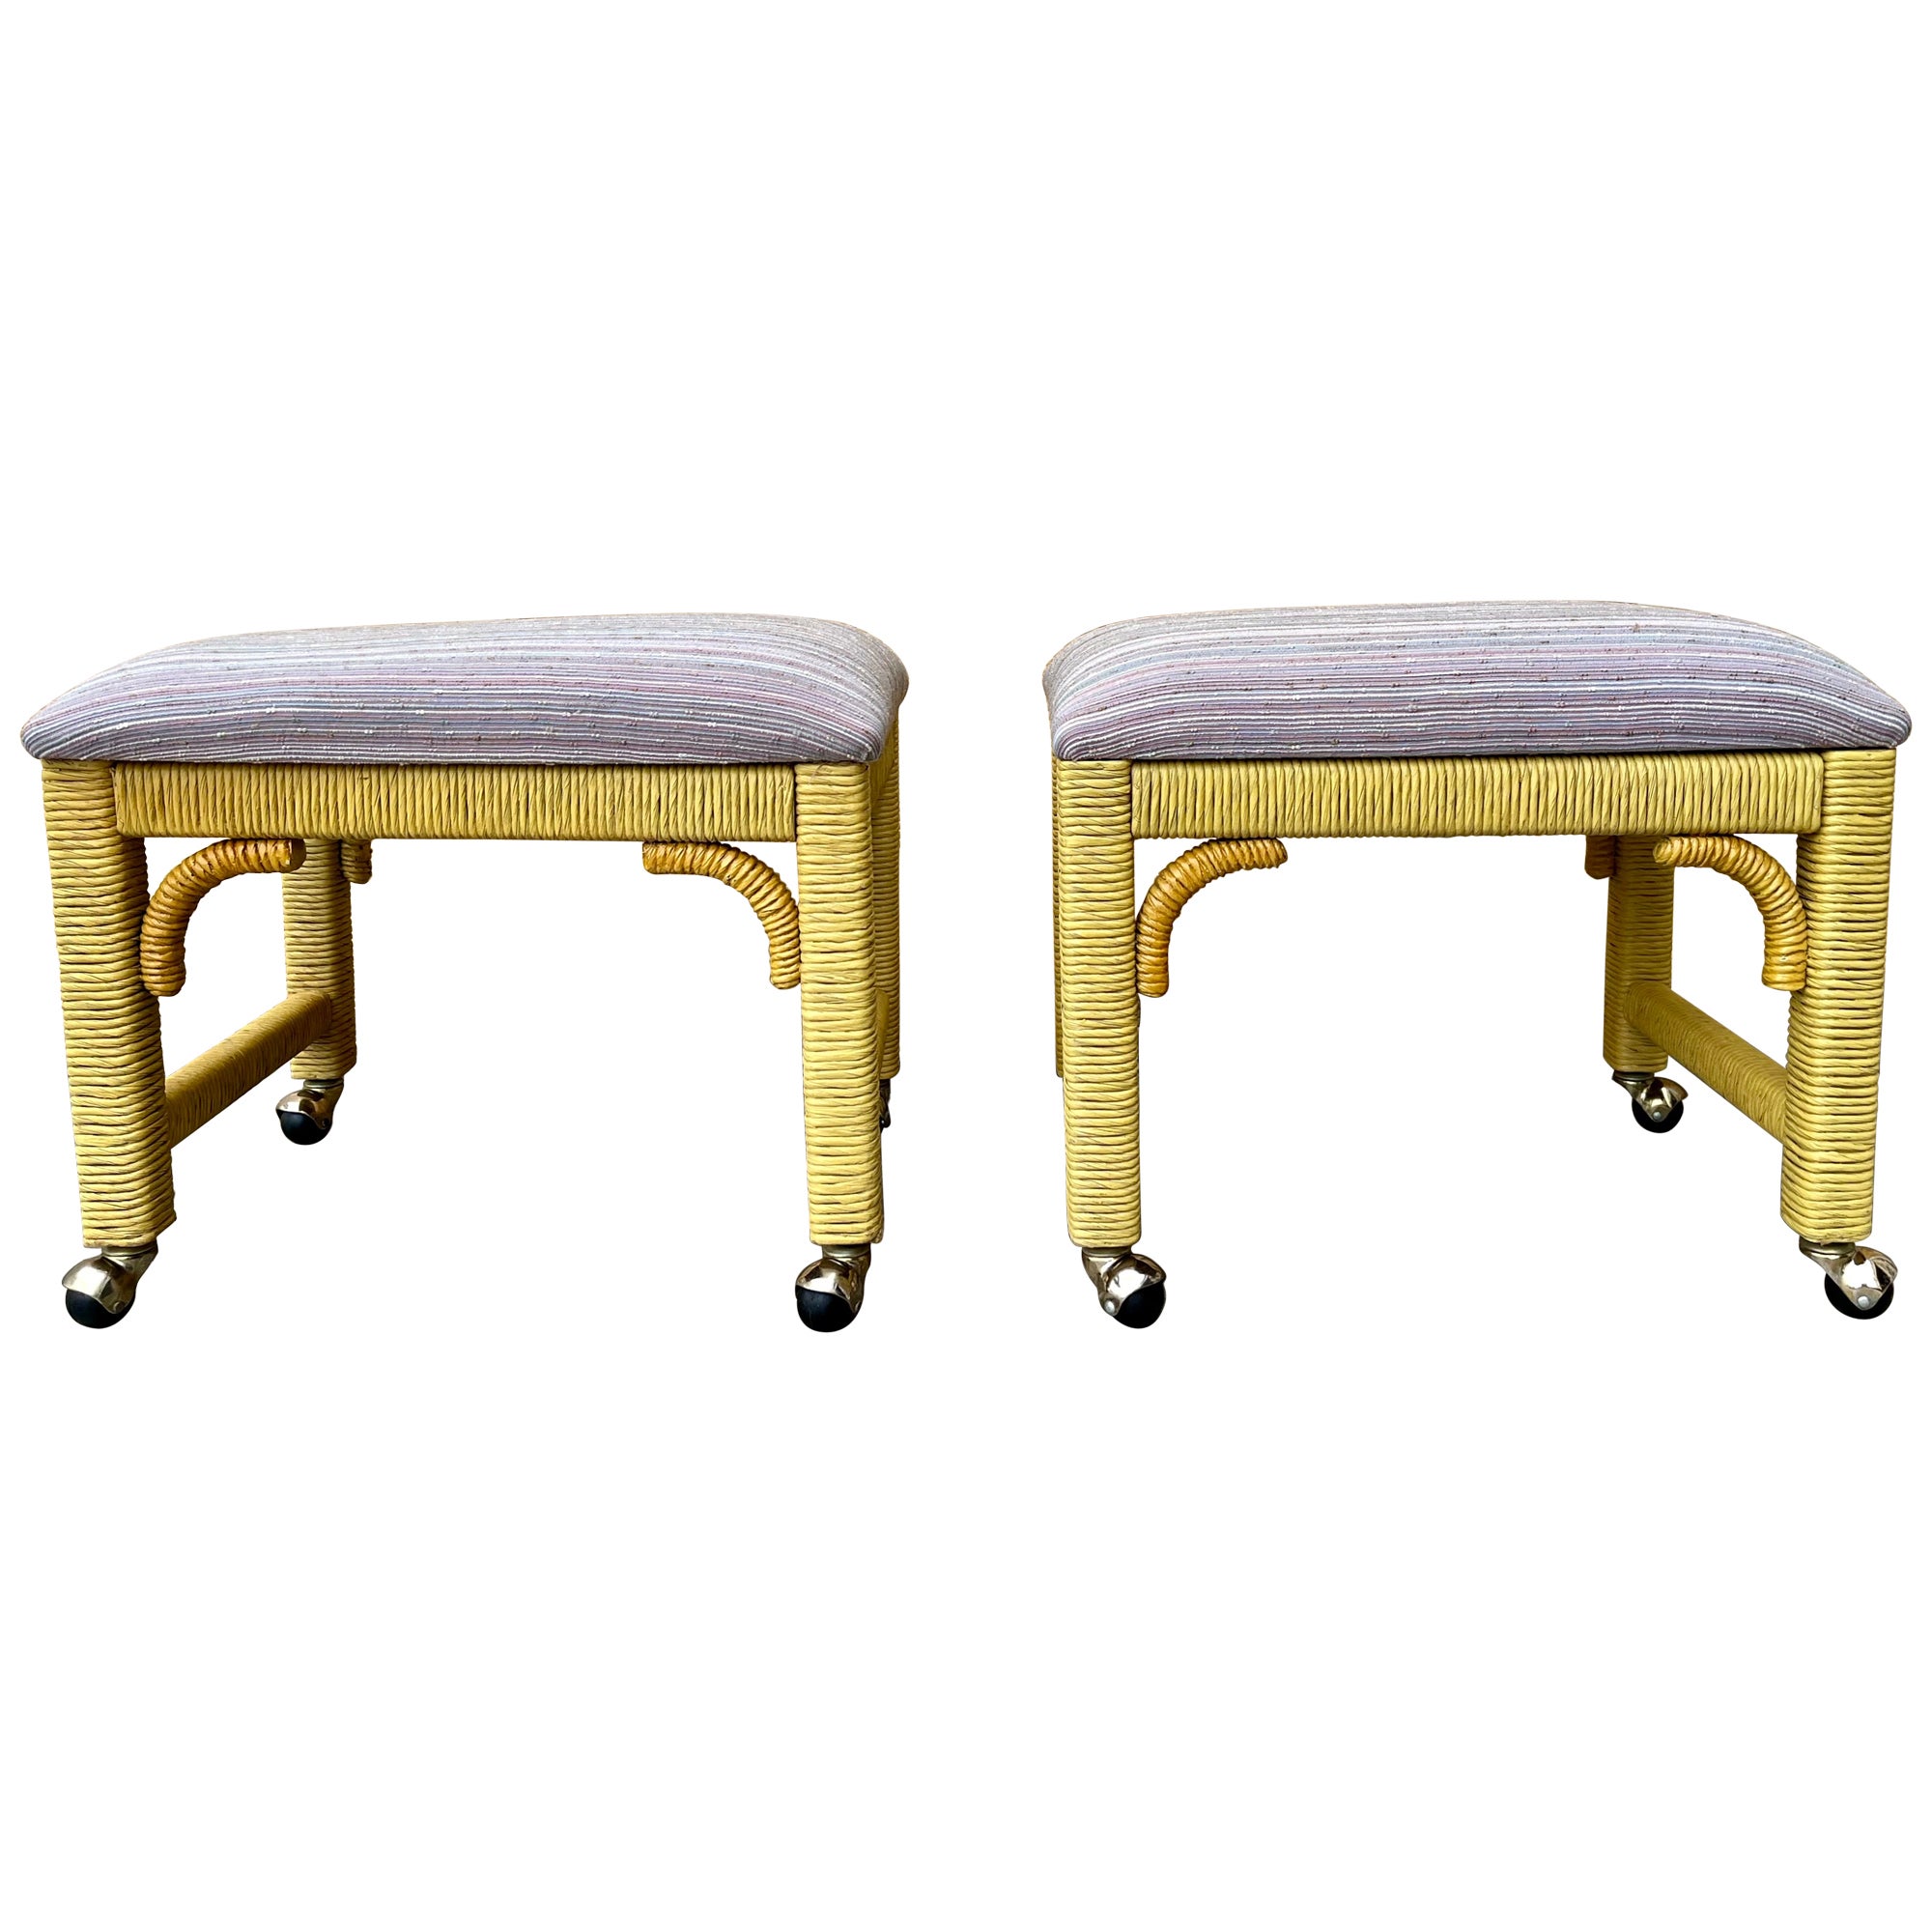 A Pair of Coastal Style Rolling Footstools on Casters by Henry Link Furniture. For Sale